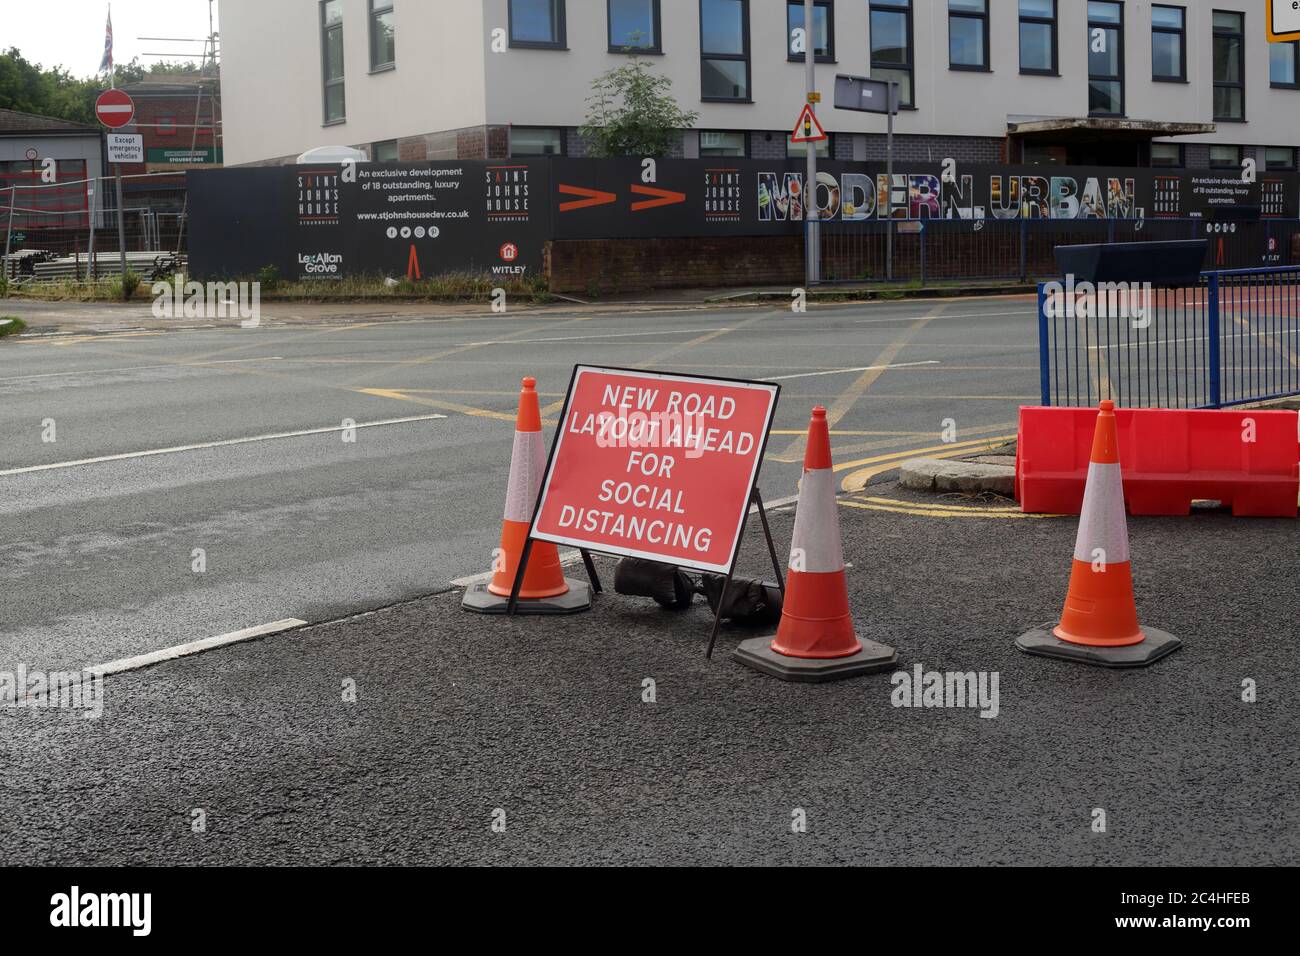 New social distancing road layout sign in Stourbridge, West midlands, England, UK. Stock Photo